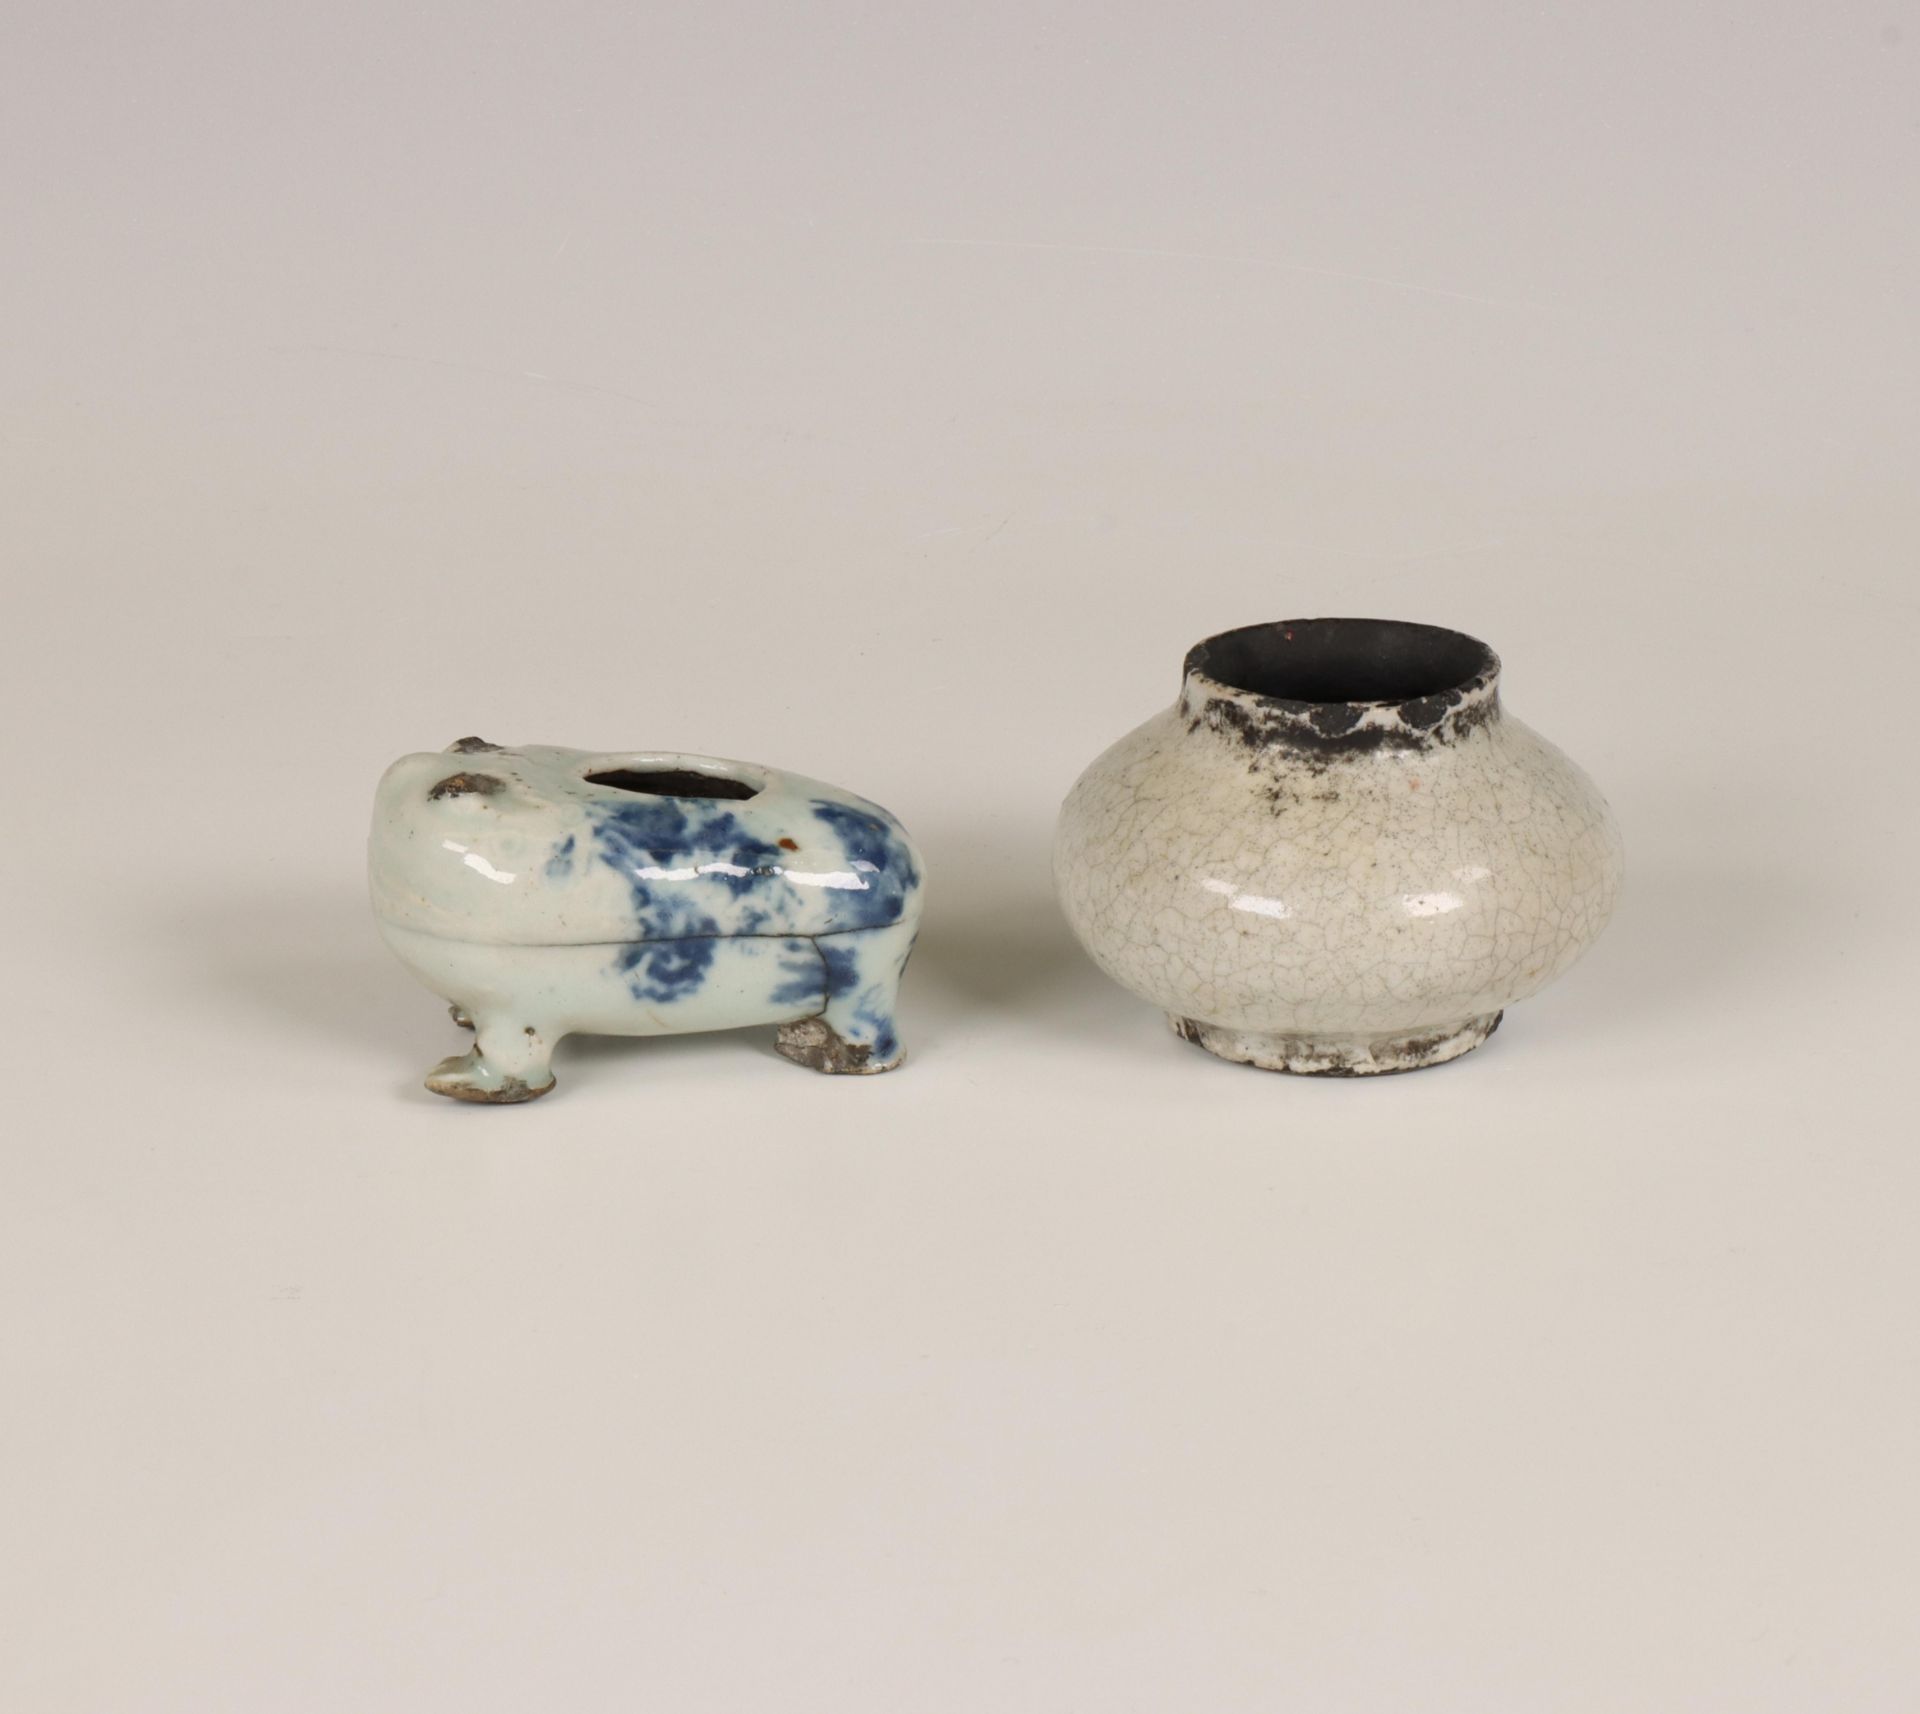 China, blue and white porcelain water dropper and an ink pot, Ming dynasty (1368-1644),